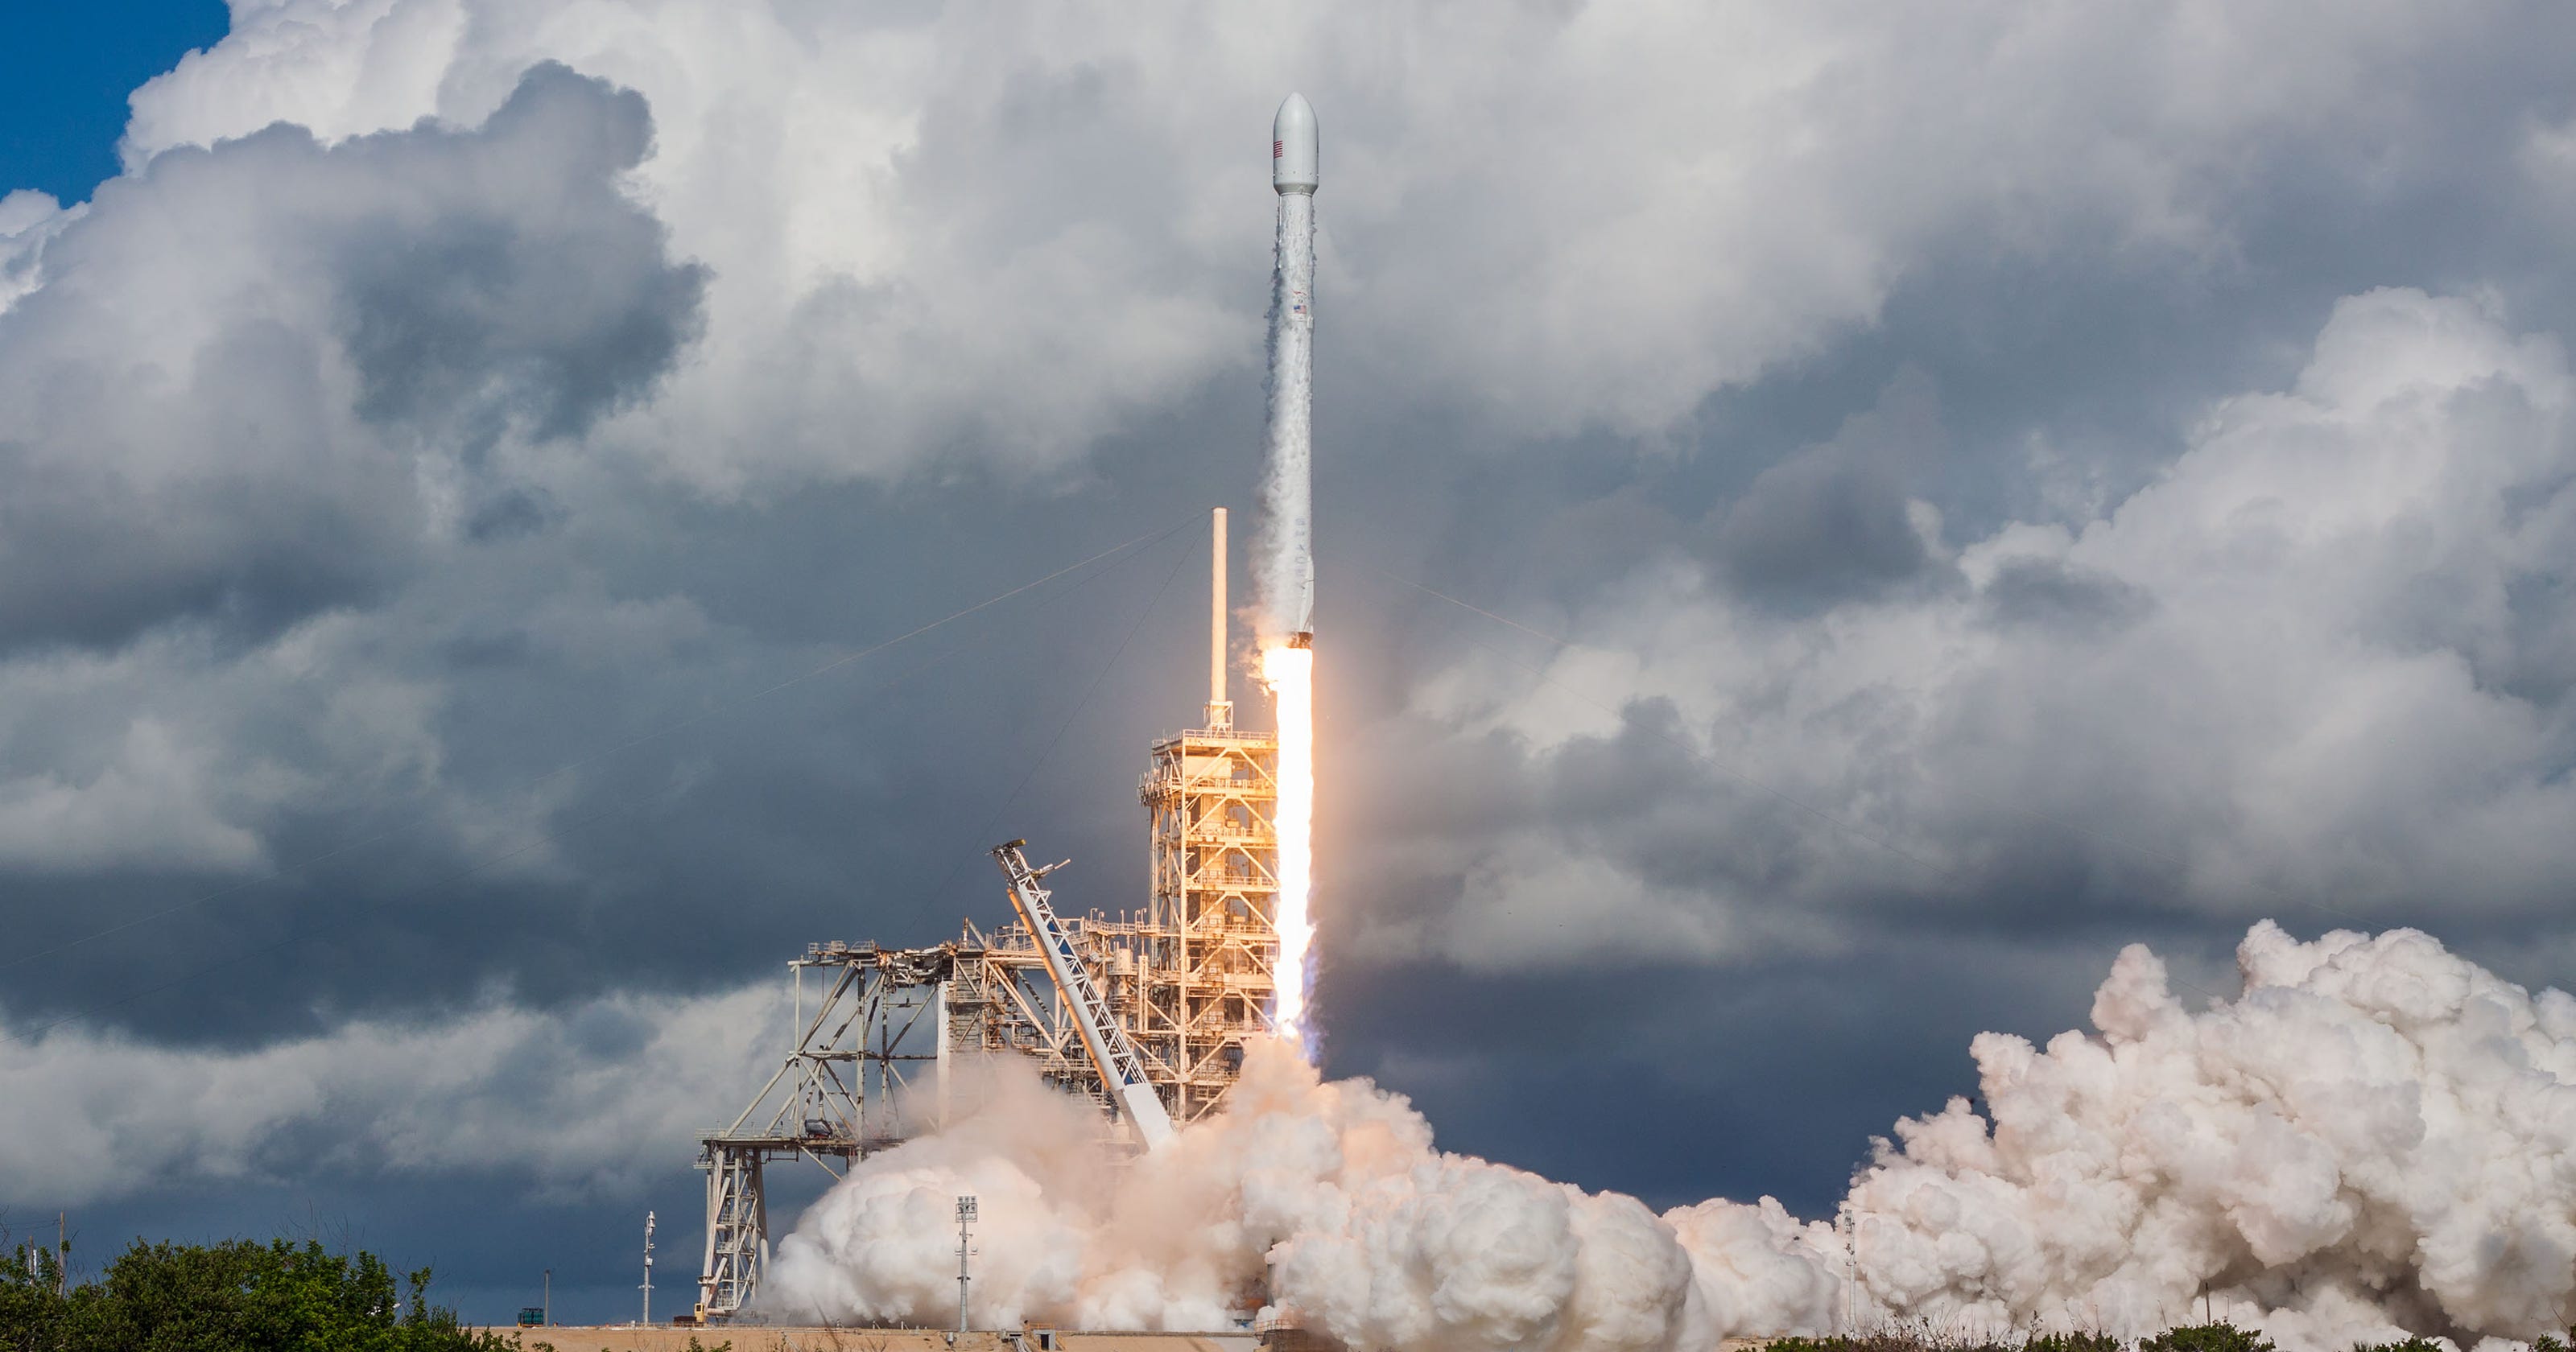 How to watch SpaceX's late night Falcon 9 launch from Cape Canaveral3200 x 1680